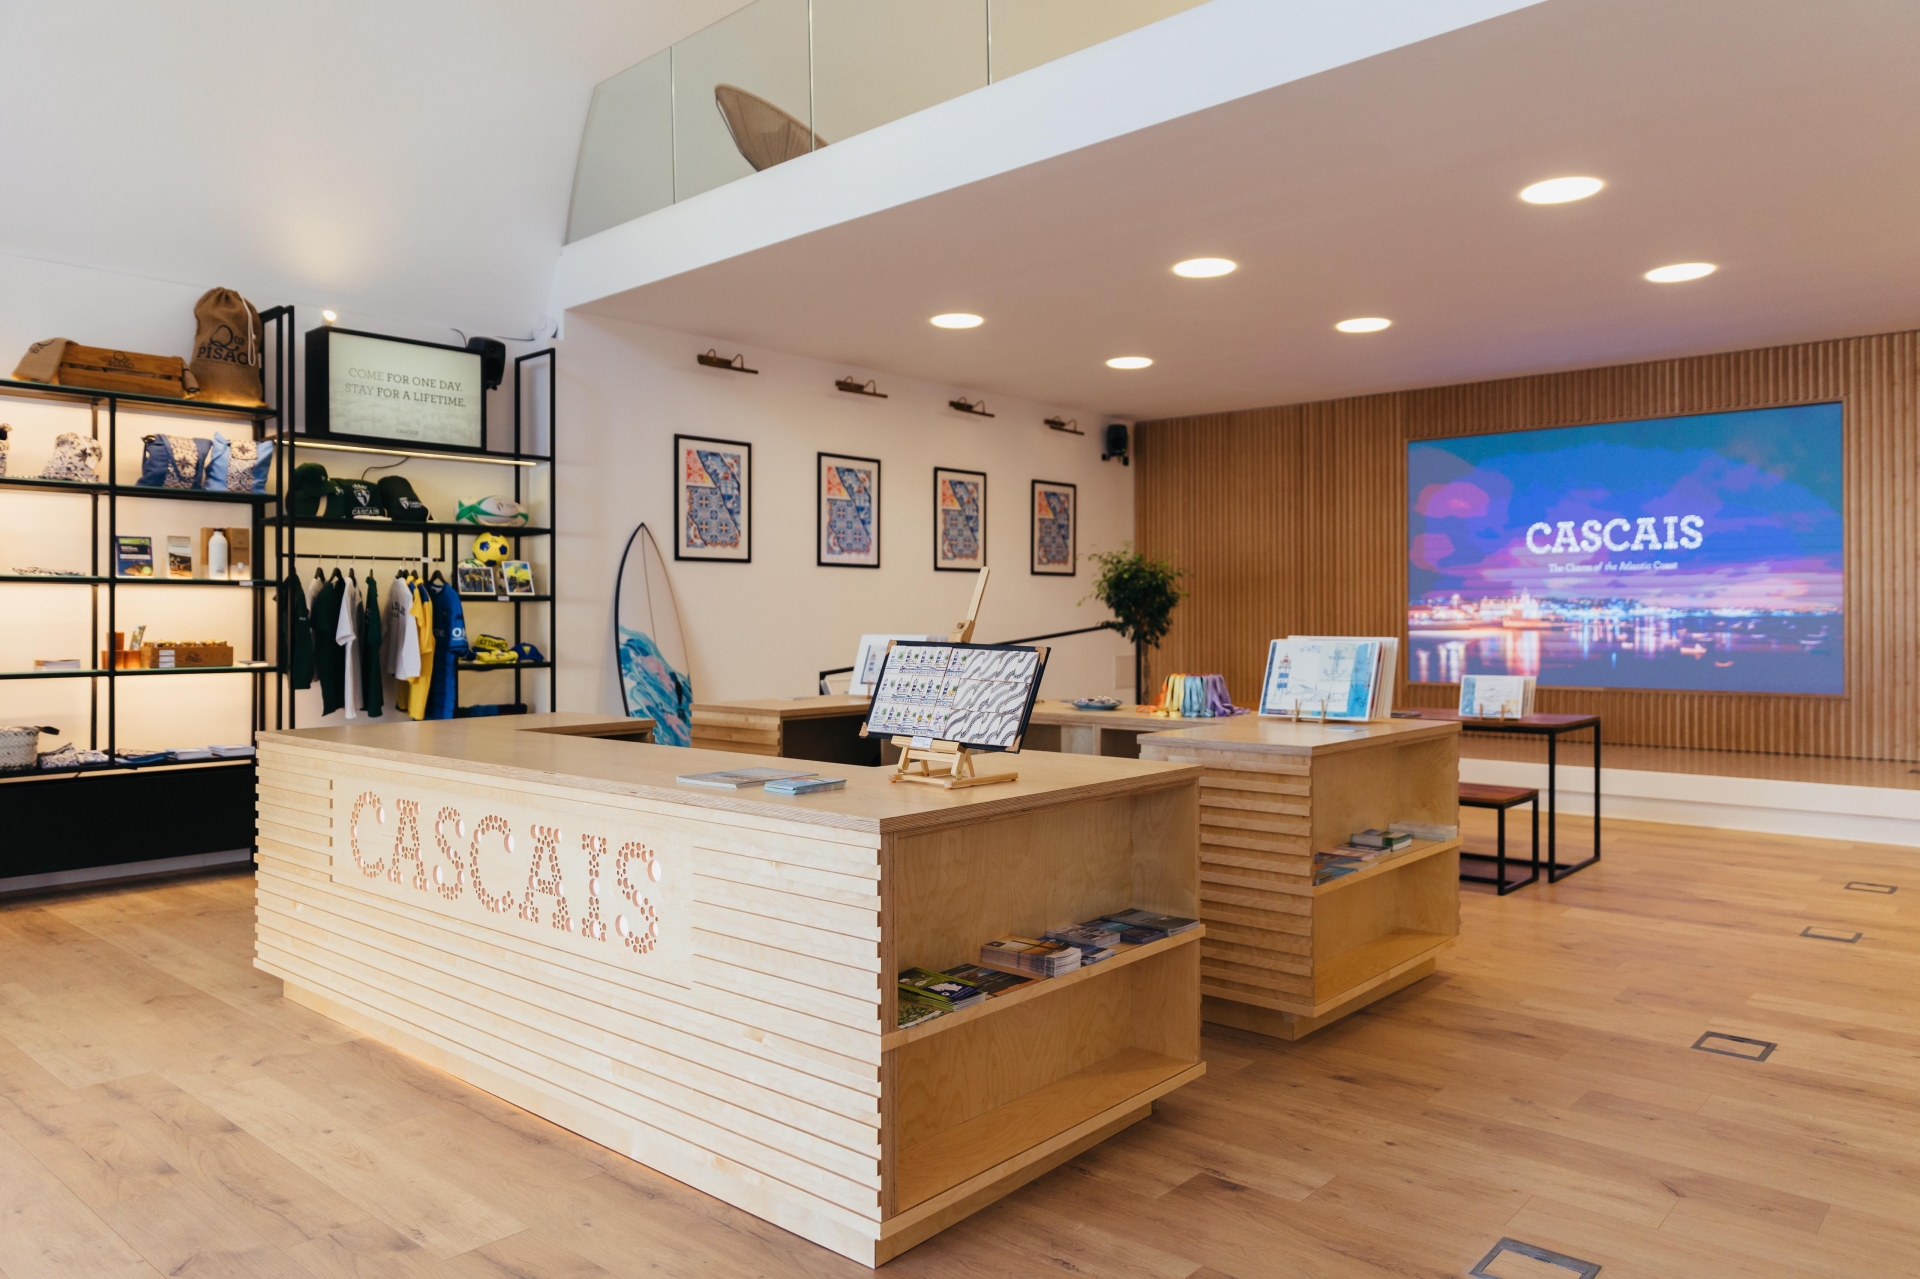 The country's first Visitor Center with coworking space reopened in Cascais